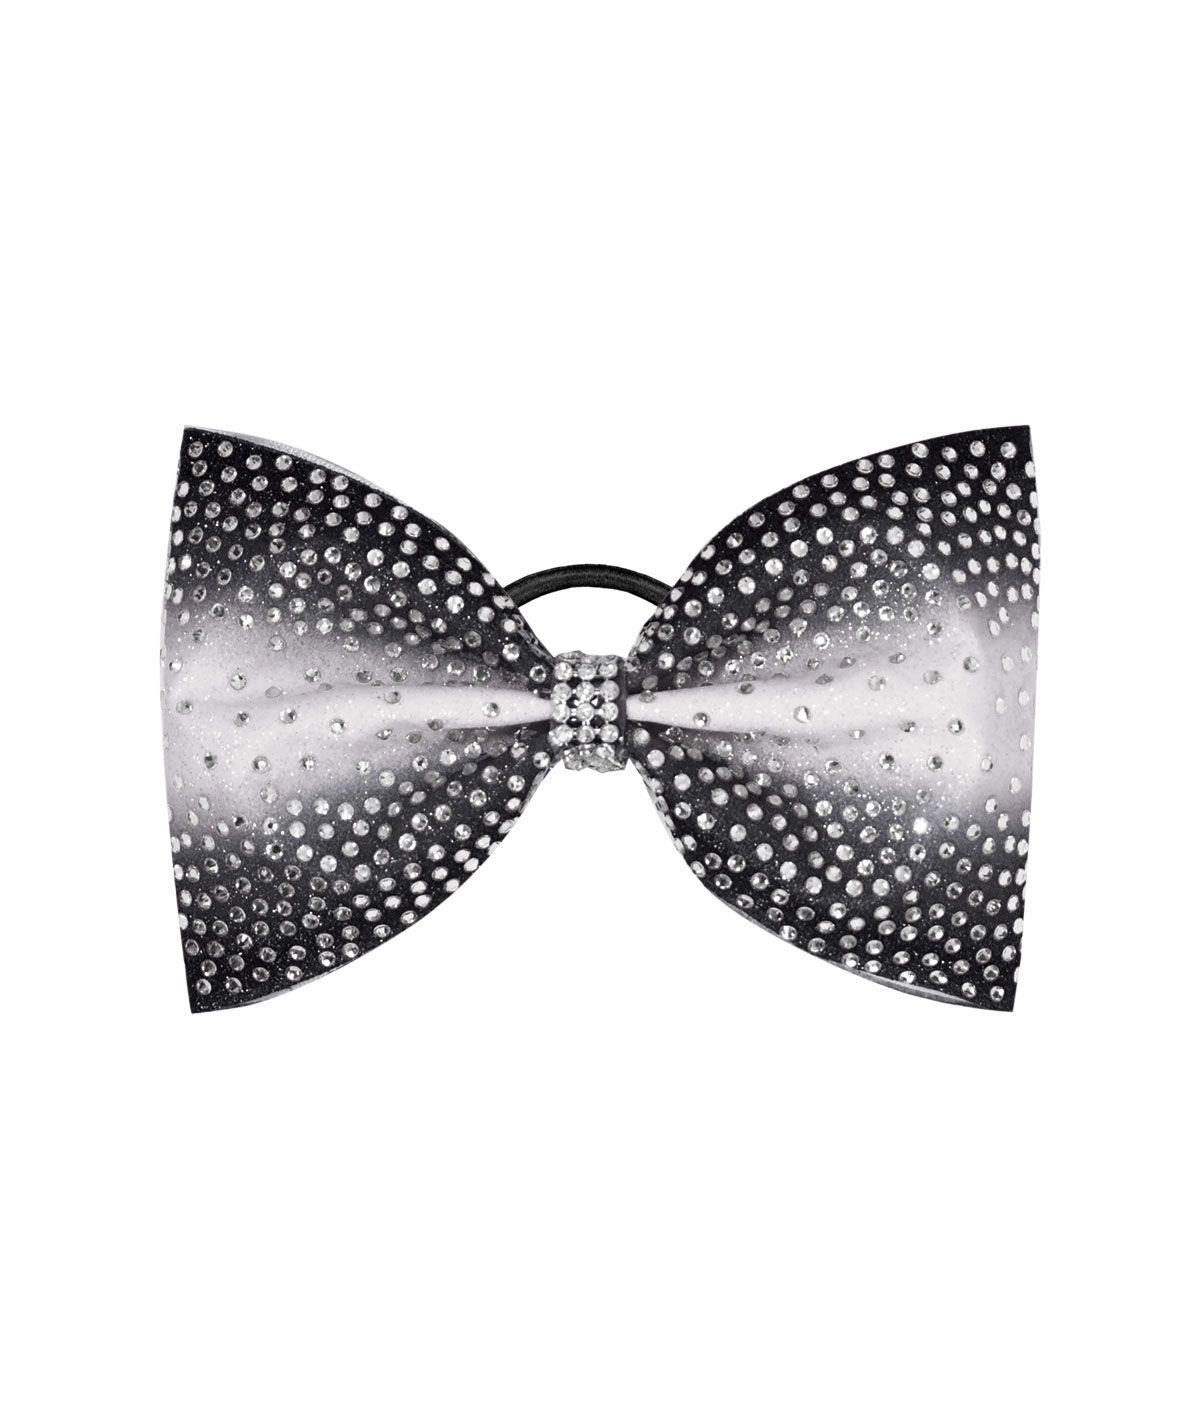 Tailless circus cheer bow